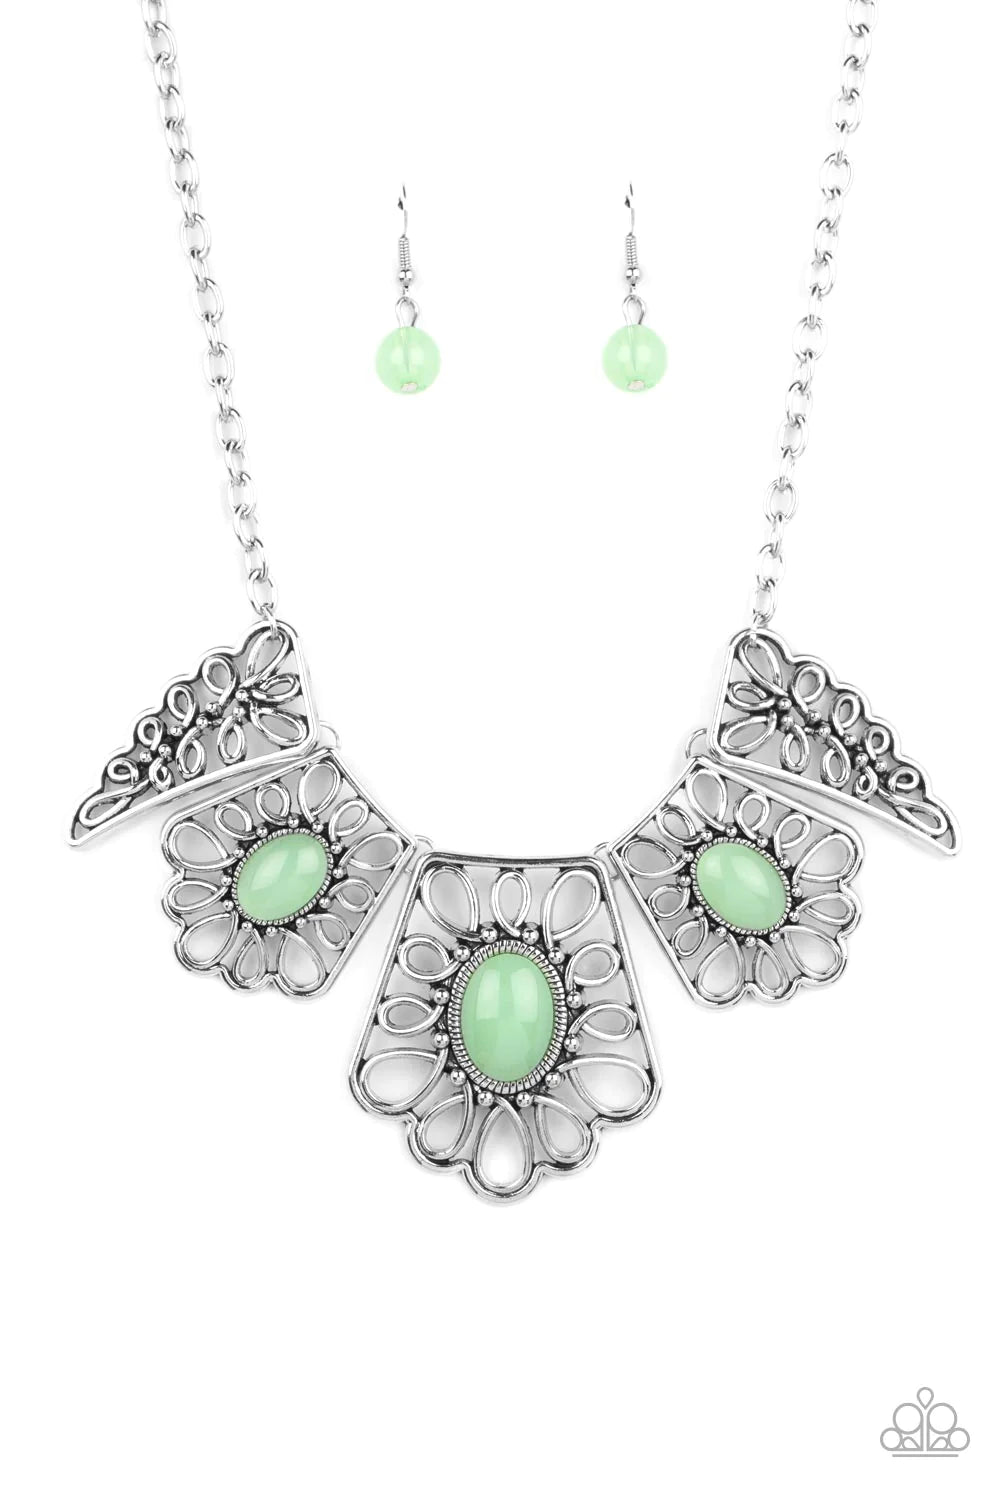 Paparazzi Accessories Glimmering Groves - Green Airy frames formed from swirls of filigree fan out along the collar in a vintage display. Shiny Basil beads are pressed into the three centermost frames, with smaller floral-inspired accents on either side a